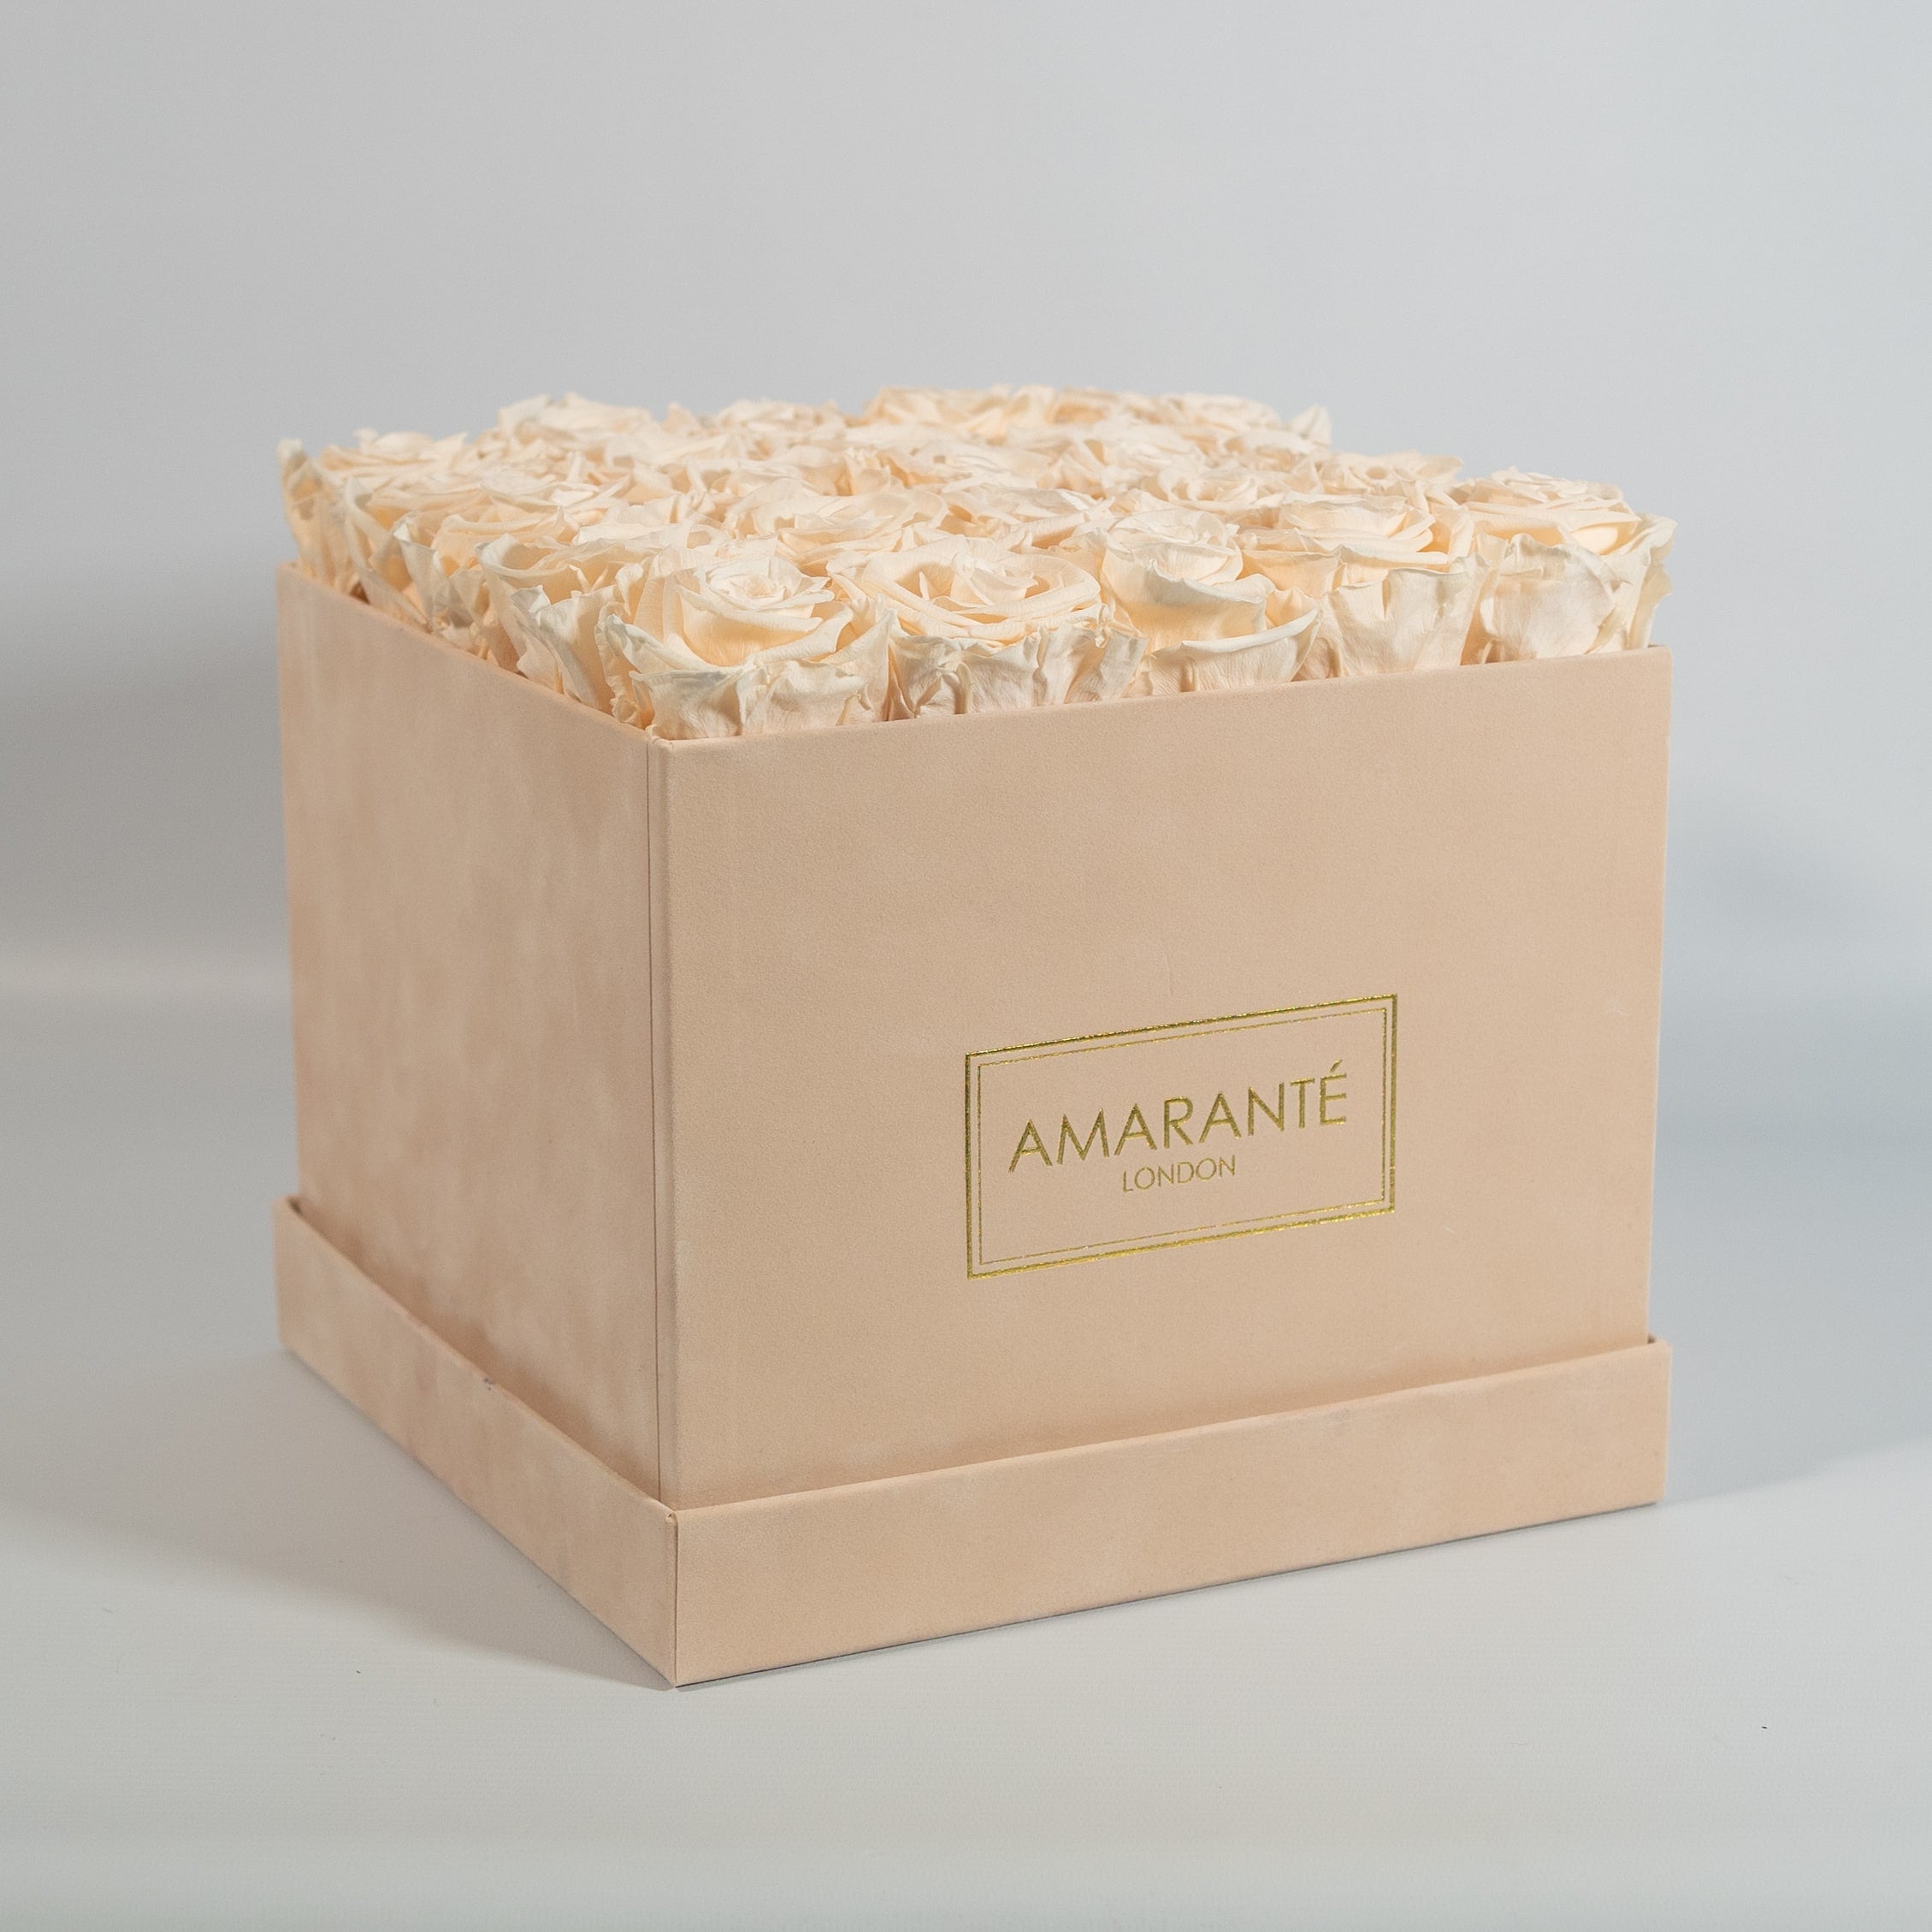 Exciting Champagne Roses in a beautiful beige box.